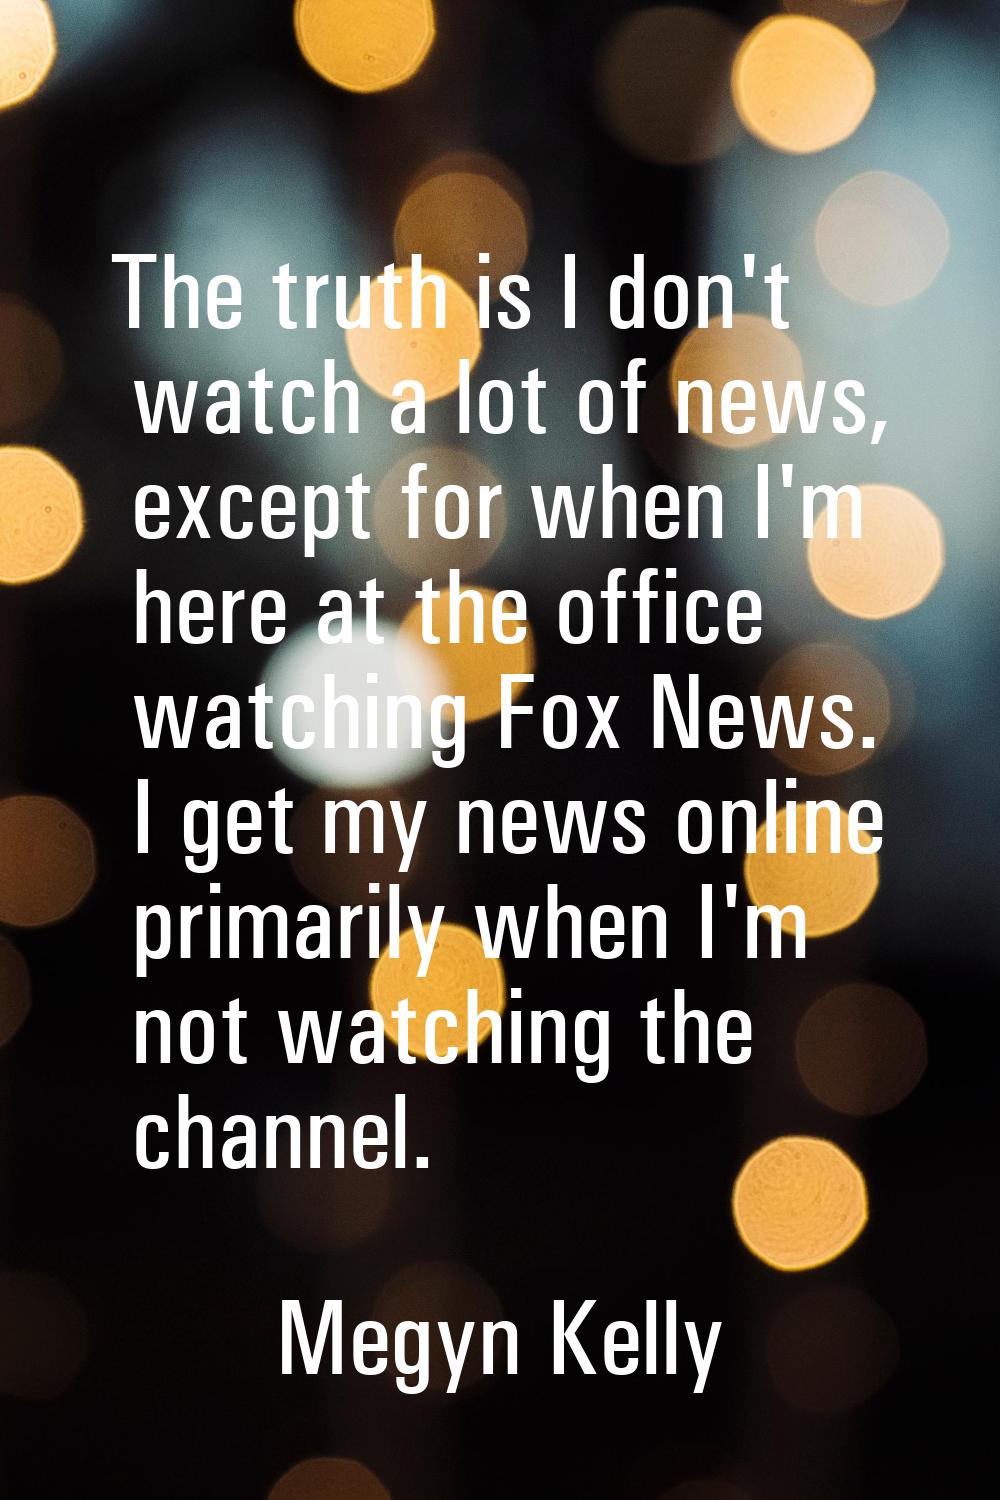 The truth is I don't watch a lot of news, except for when I'm here at the office watching Fox News.